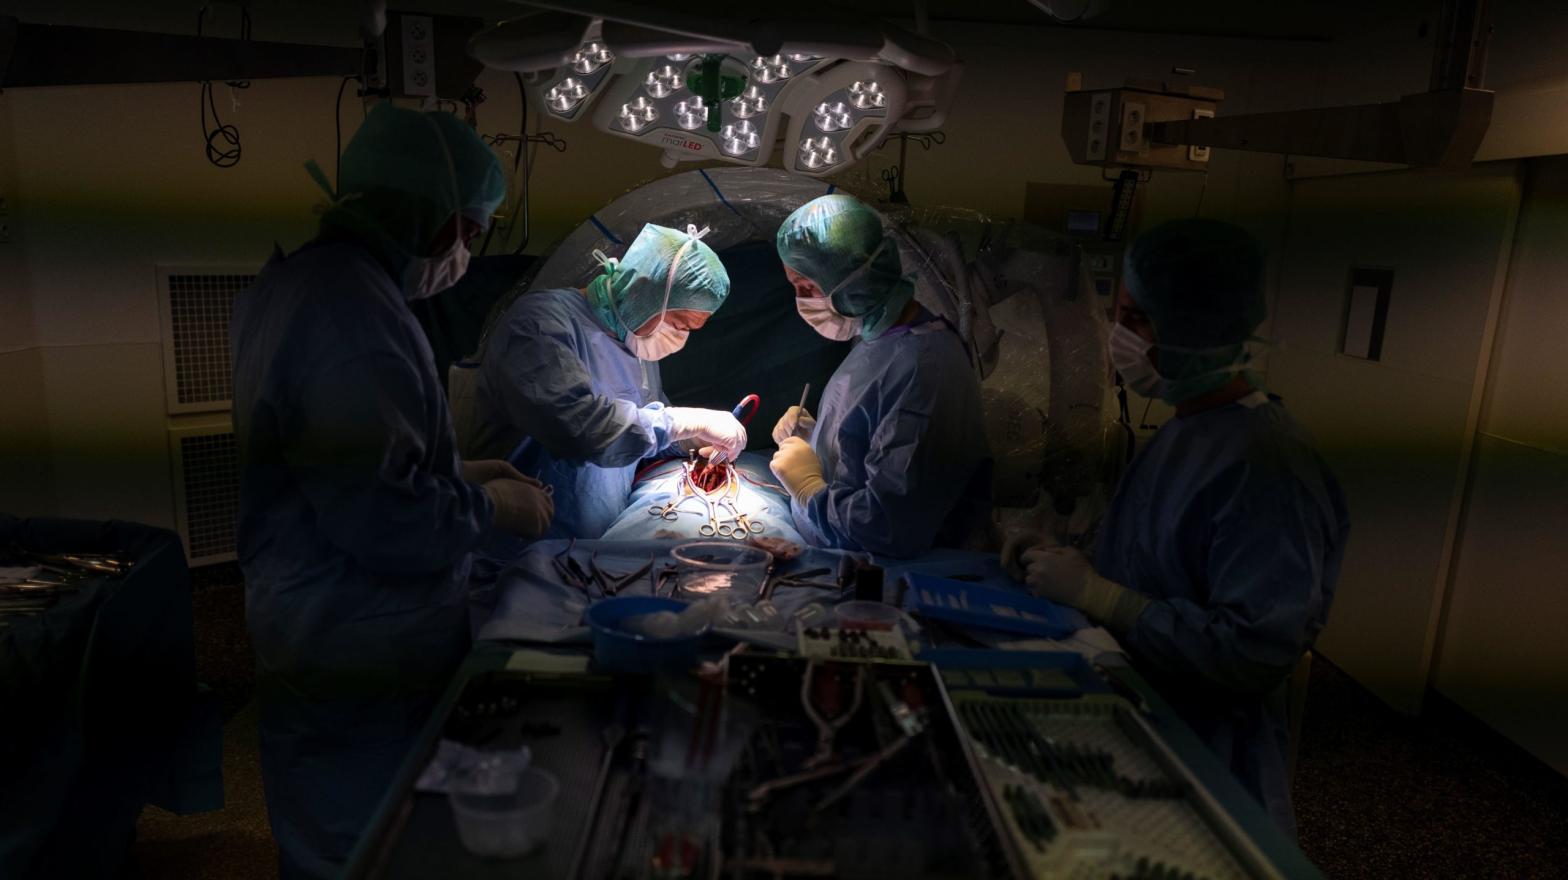 Surgeons in France operate on a patient to inject him with phages as a treatment against multi-drug-resistant bacteria. (Photo: ROMAIN LAFABREGUE/AFP, Getty Images)